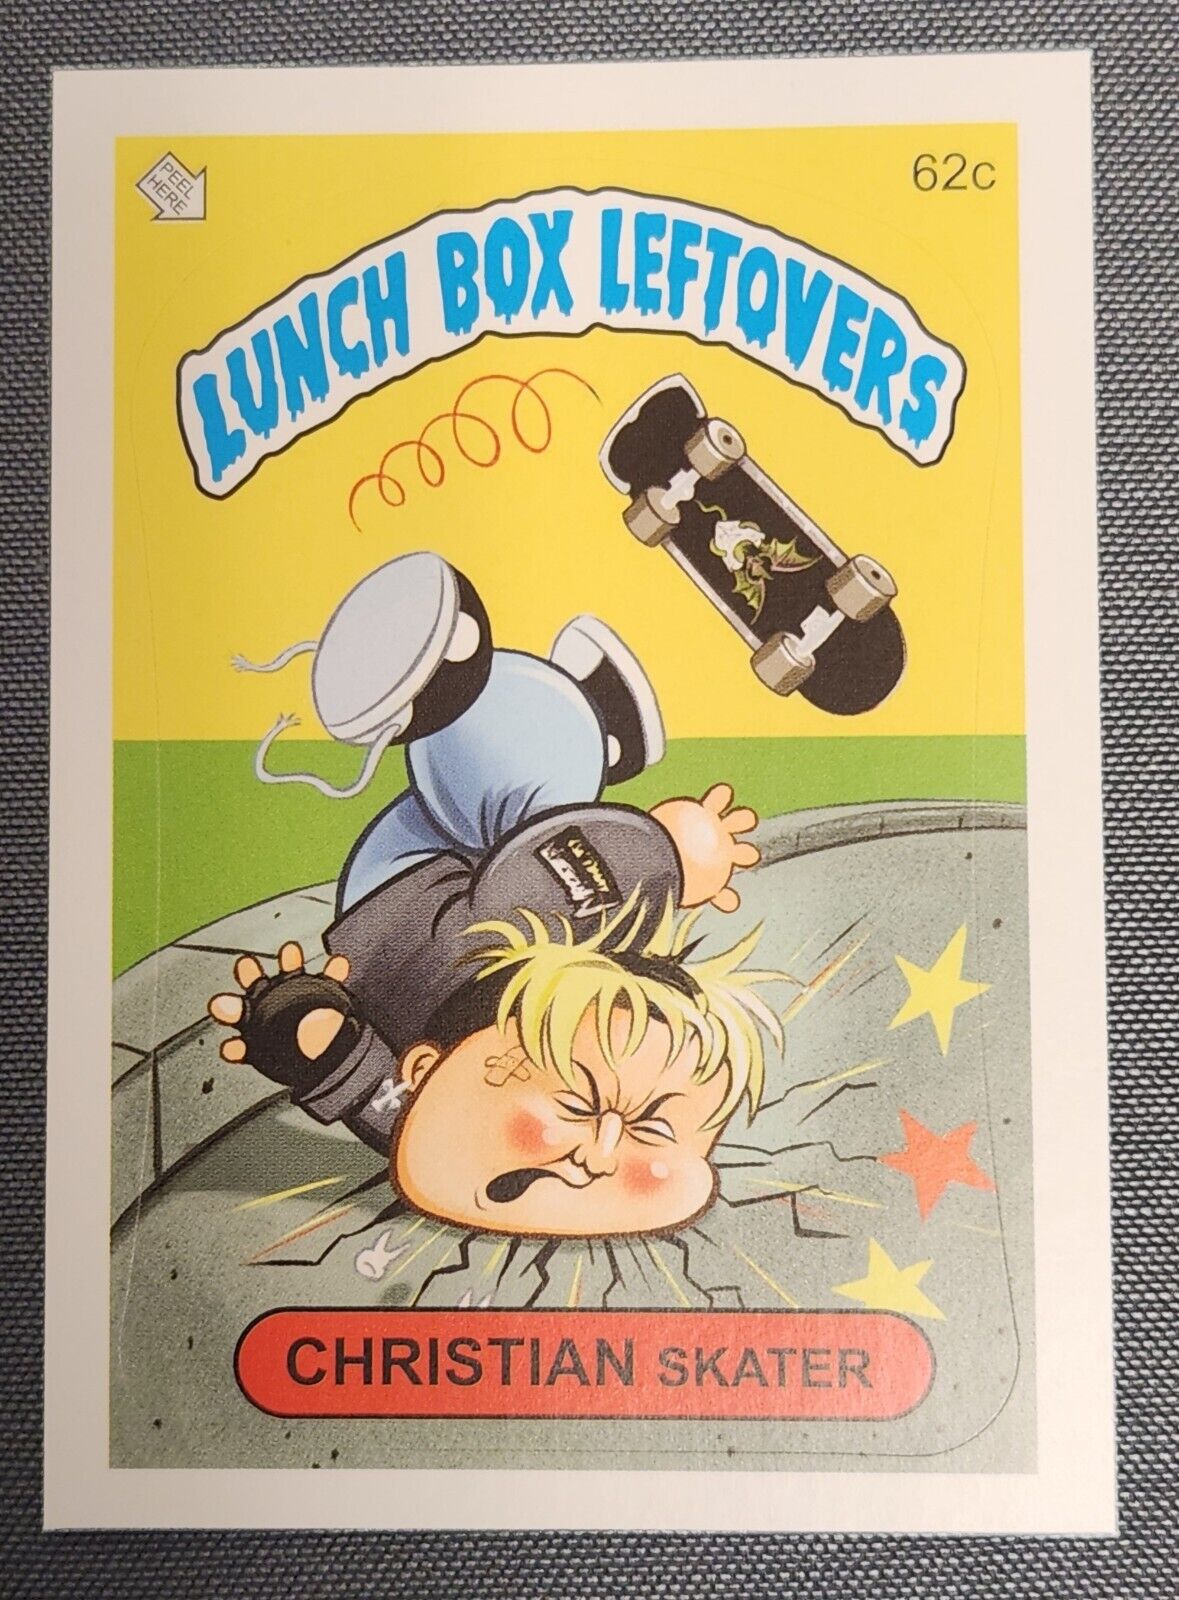 CHRISTIAN SKATER: LUNCH BOX LEFTOVERS SSFC Series 3 SP (#62c) C-card Parallel 